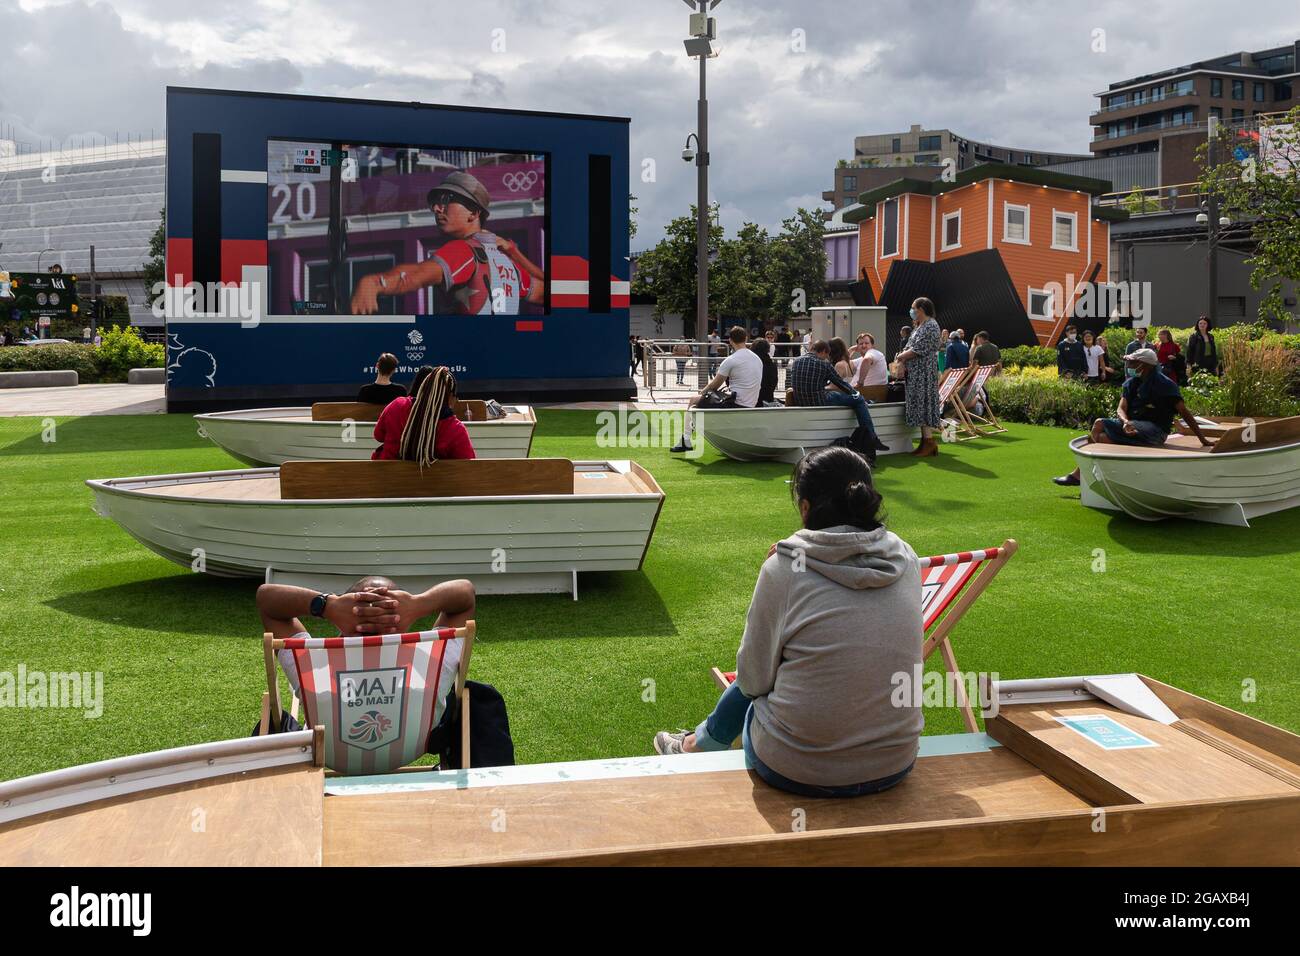 LONDON, UK. JULY 31ST. General views of the Tokyo 2020 Olympics fanzone area at Westfield London on July 31st 2021 in London, England. (Credit: Tejas Sandhu | MI News) Stock Photo